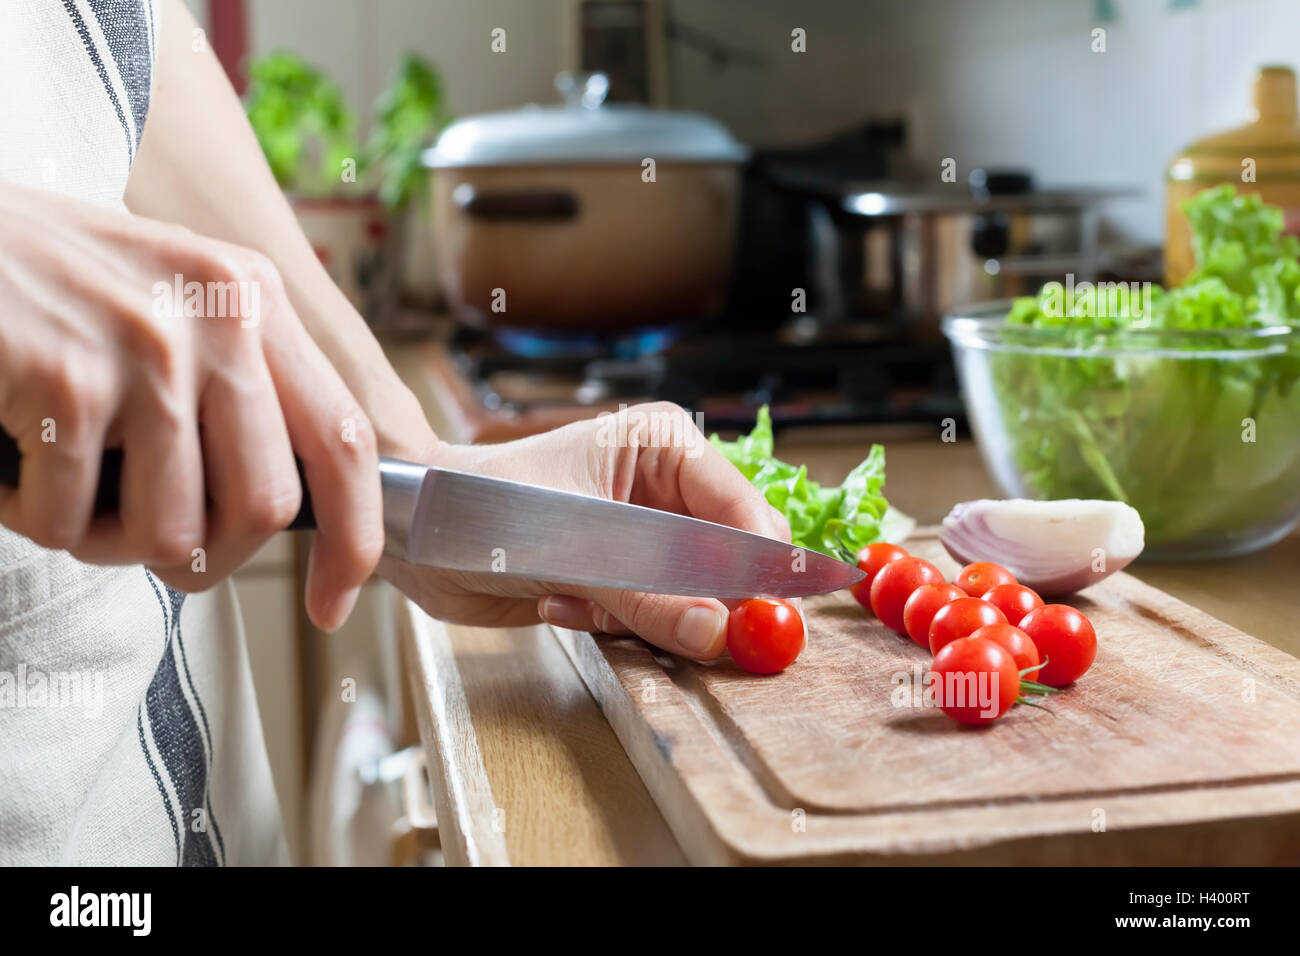 Woman cutting tomatoes to prepare meal at home Stock Photo